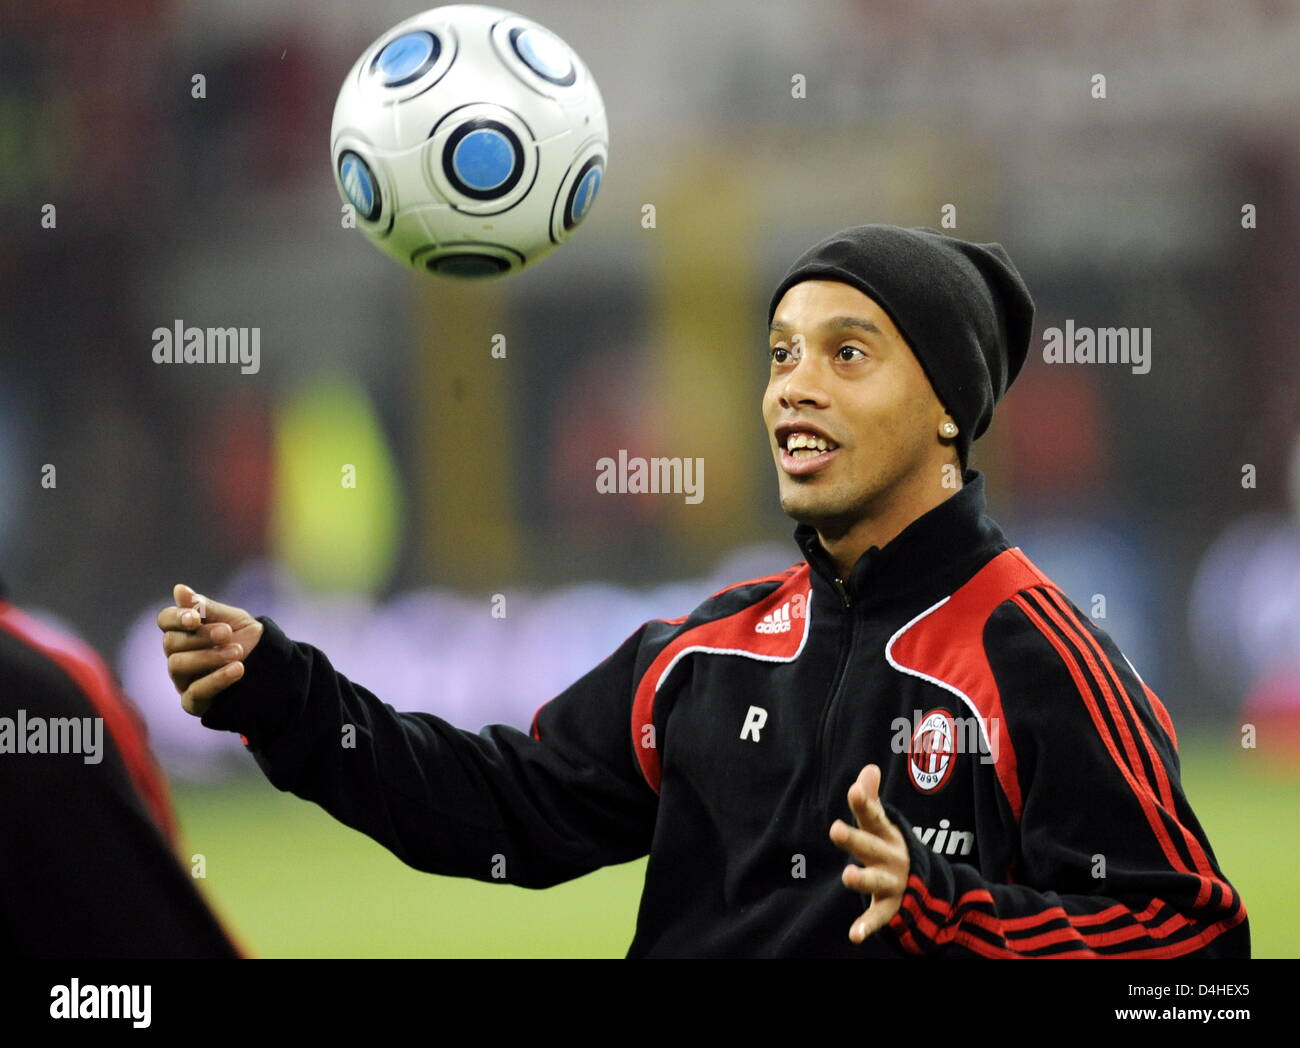 Milan?s Ronaldinho warms up ahead of the UEFA Cup match AC Milan vs VfL Wolfsburg at San Siro Stadium in Milano, Italy, 17 December 2008. The match ended in a 2-2 tie. Photo: Jochen Luebke Stock Photo